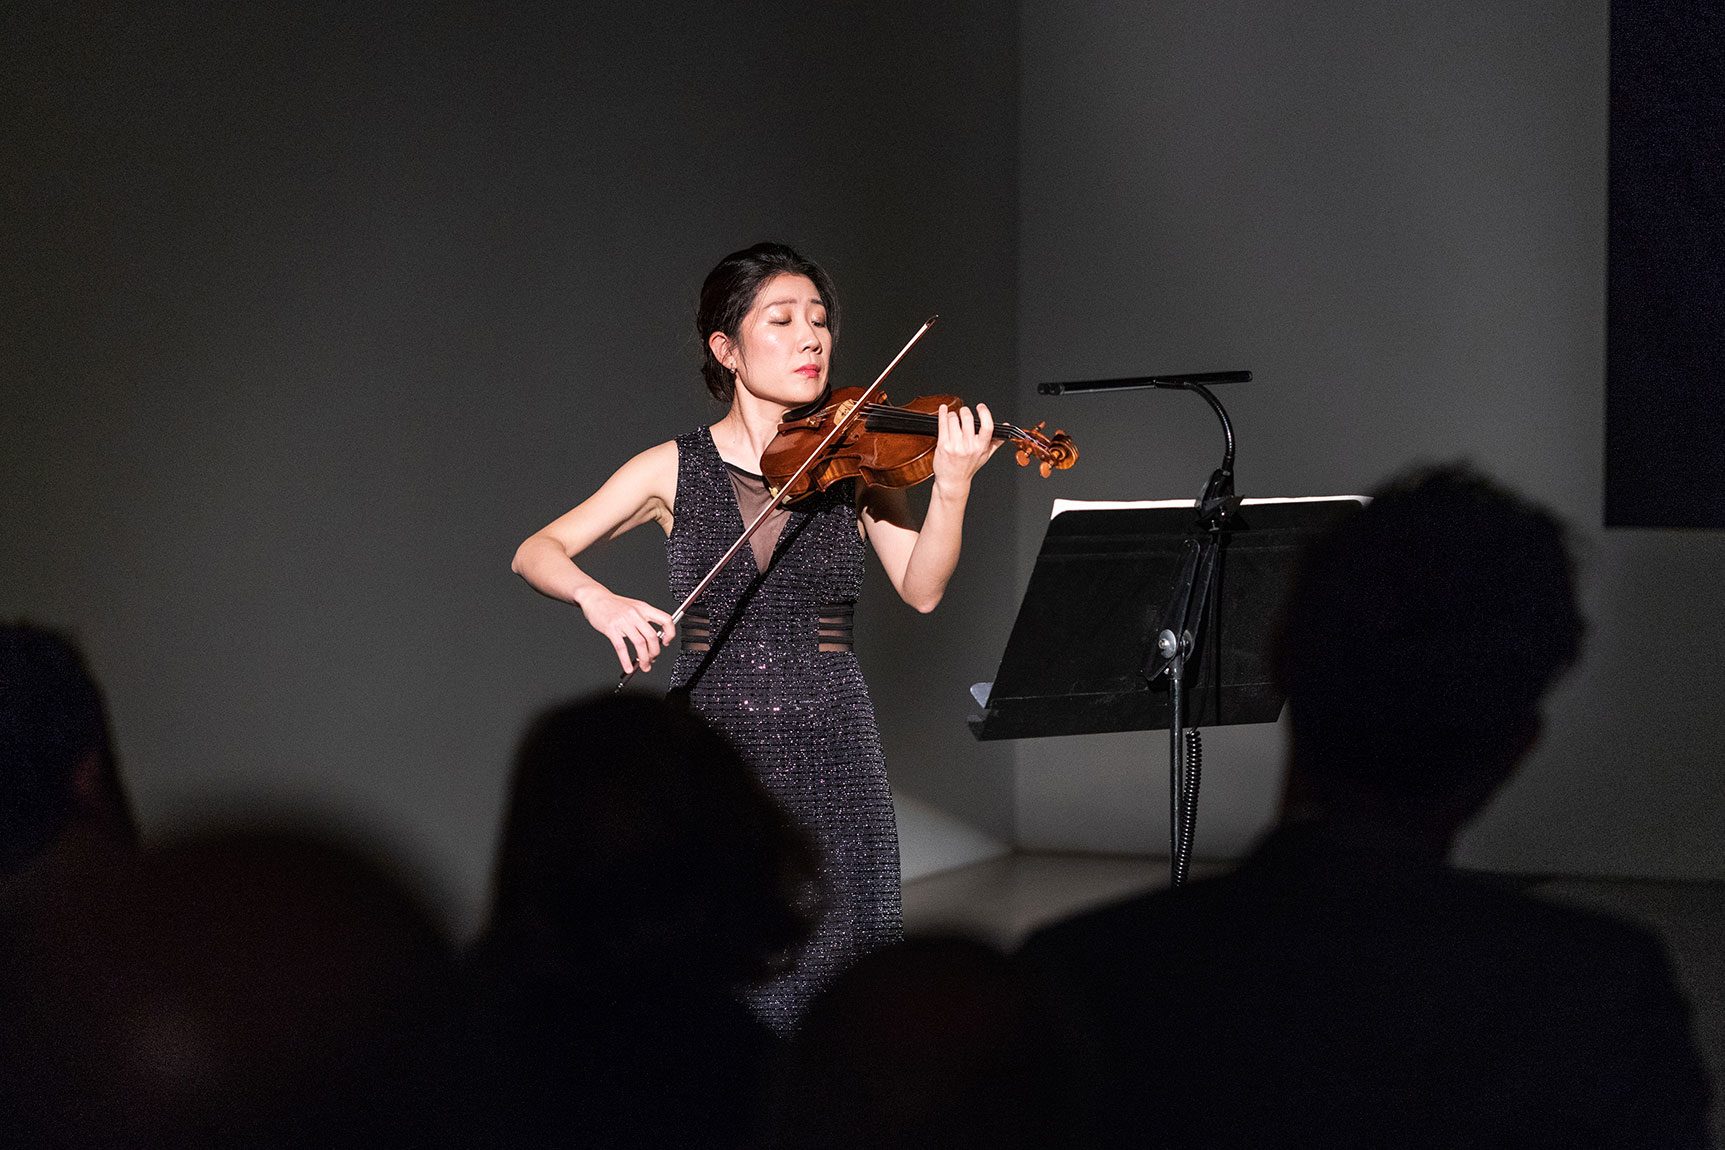 A violinist performs in the Lower Main Gallery.